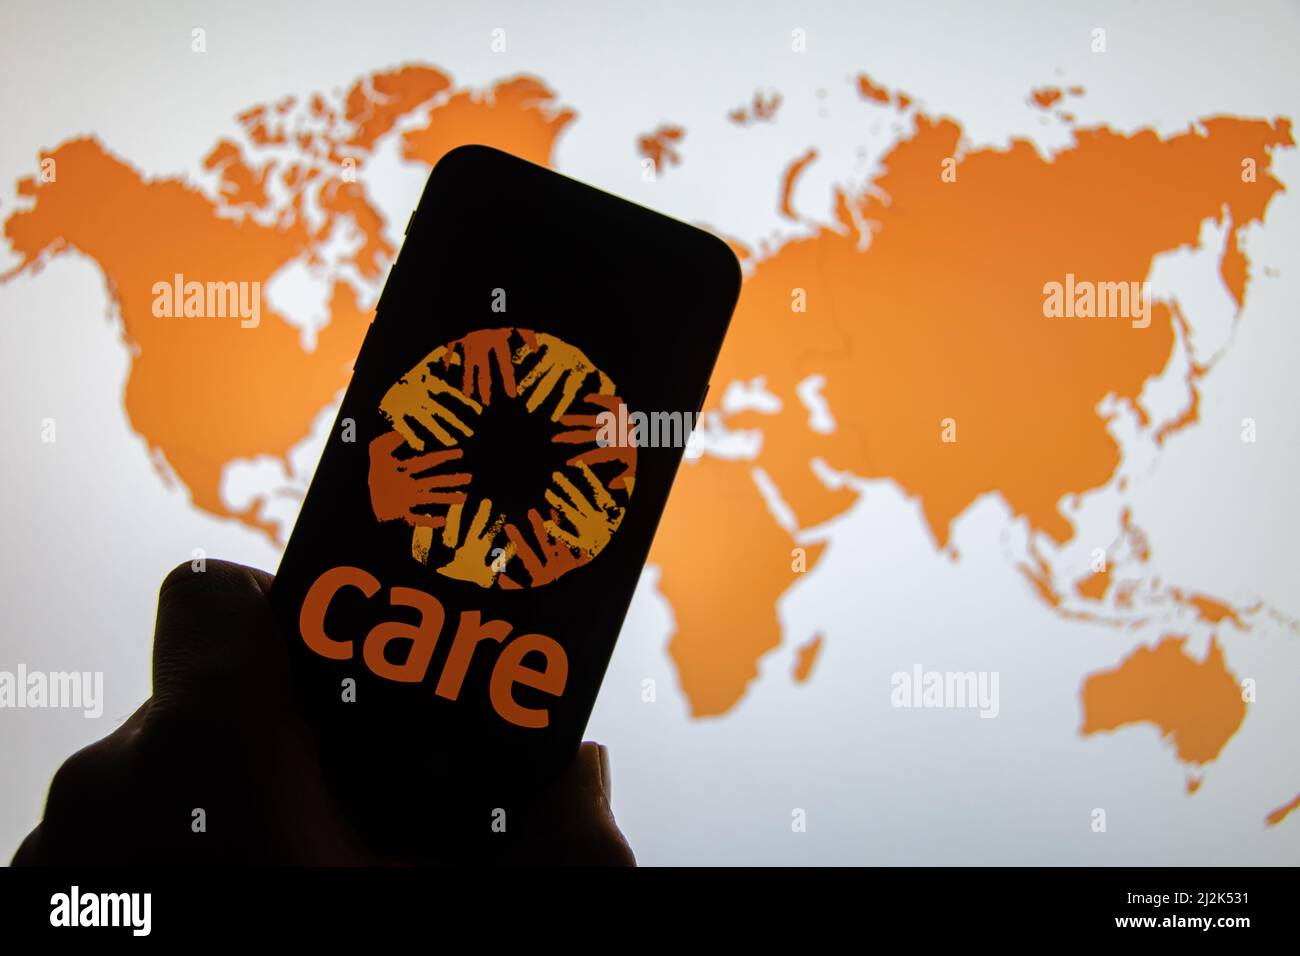 Rheinbach, Germany  1 April 2022,  The brand logo of the aid organization 'Care International' on the display of a smartphone Stock Photo